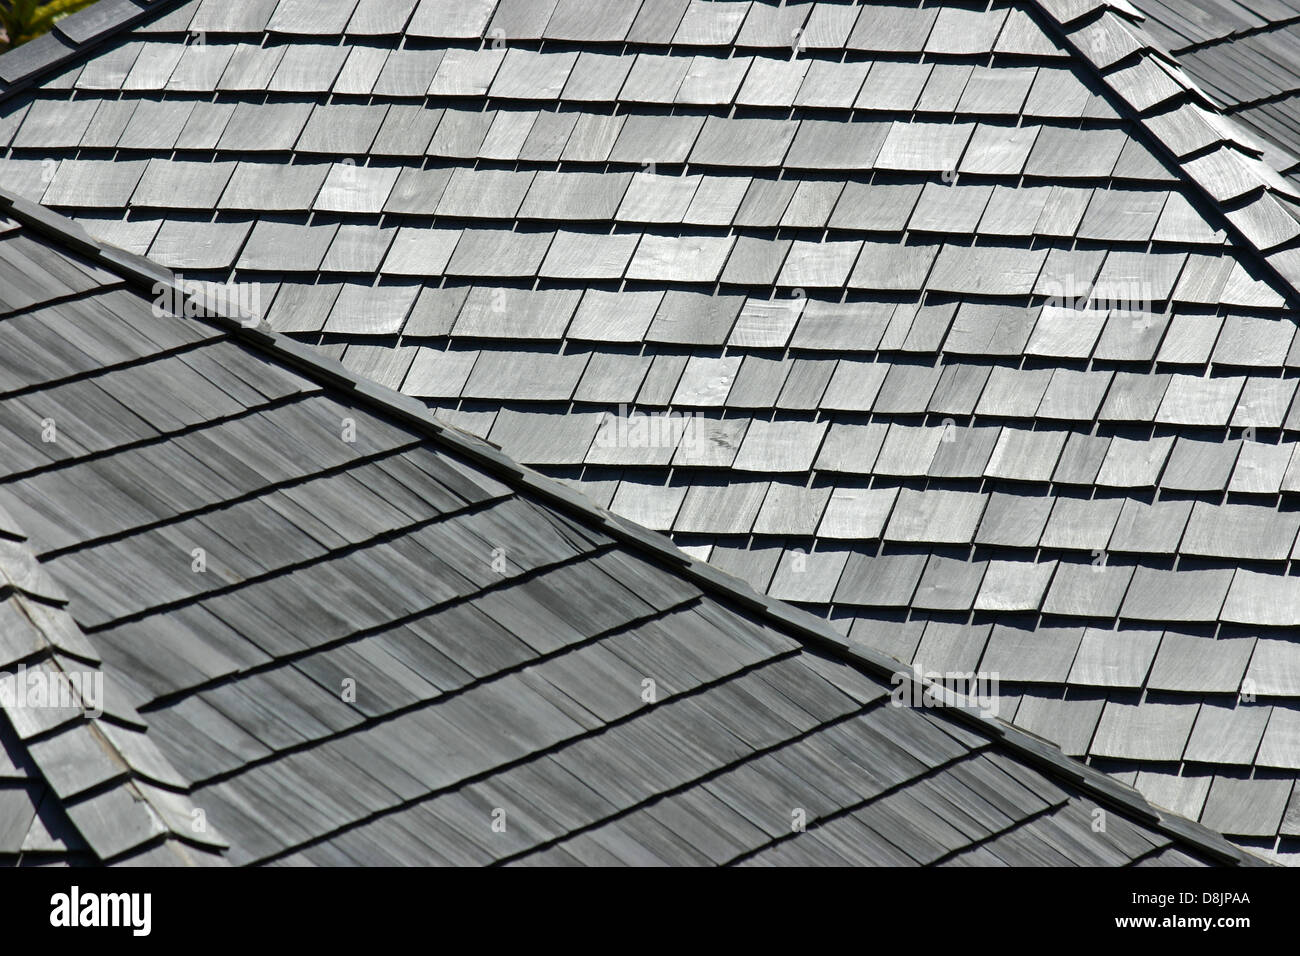 Several angled rooftops with worn and weathered wooden shingles Stock Photo